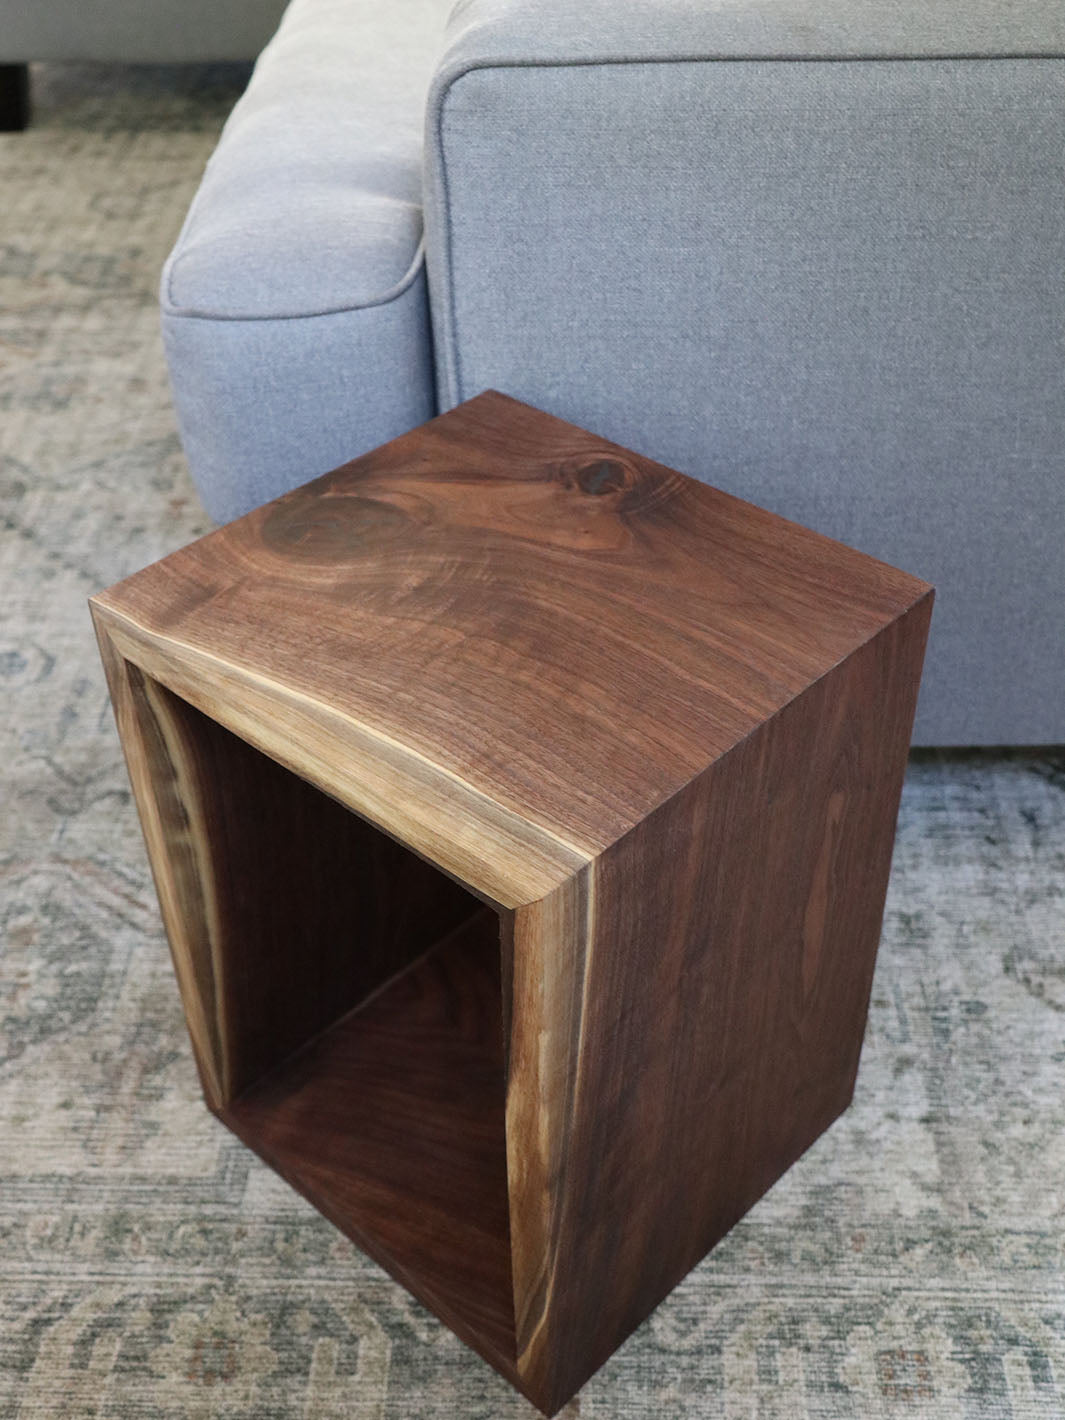 Complete Walnut Waterfall Cube Rectangle Side Table, Cuboid End Table Earthly Comfort Side Tables  - 6